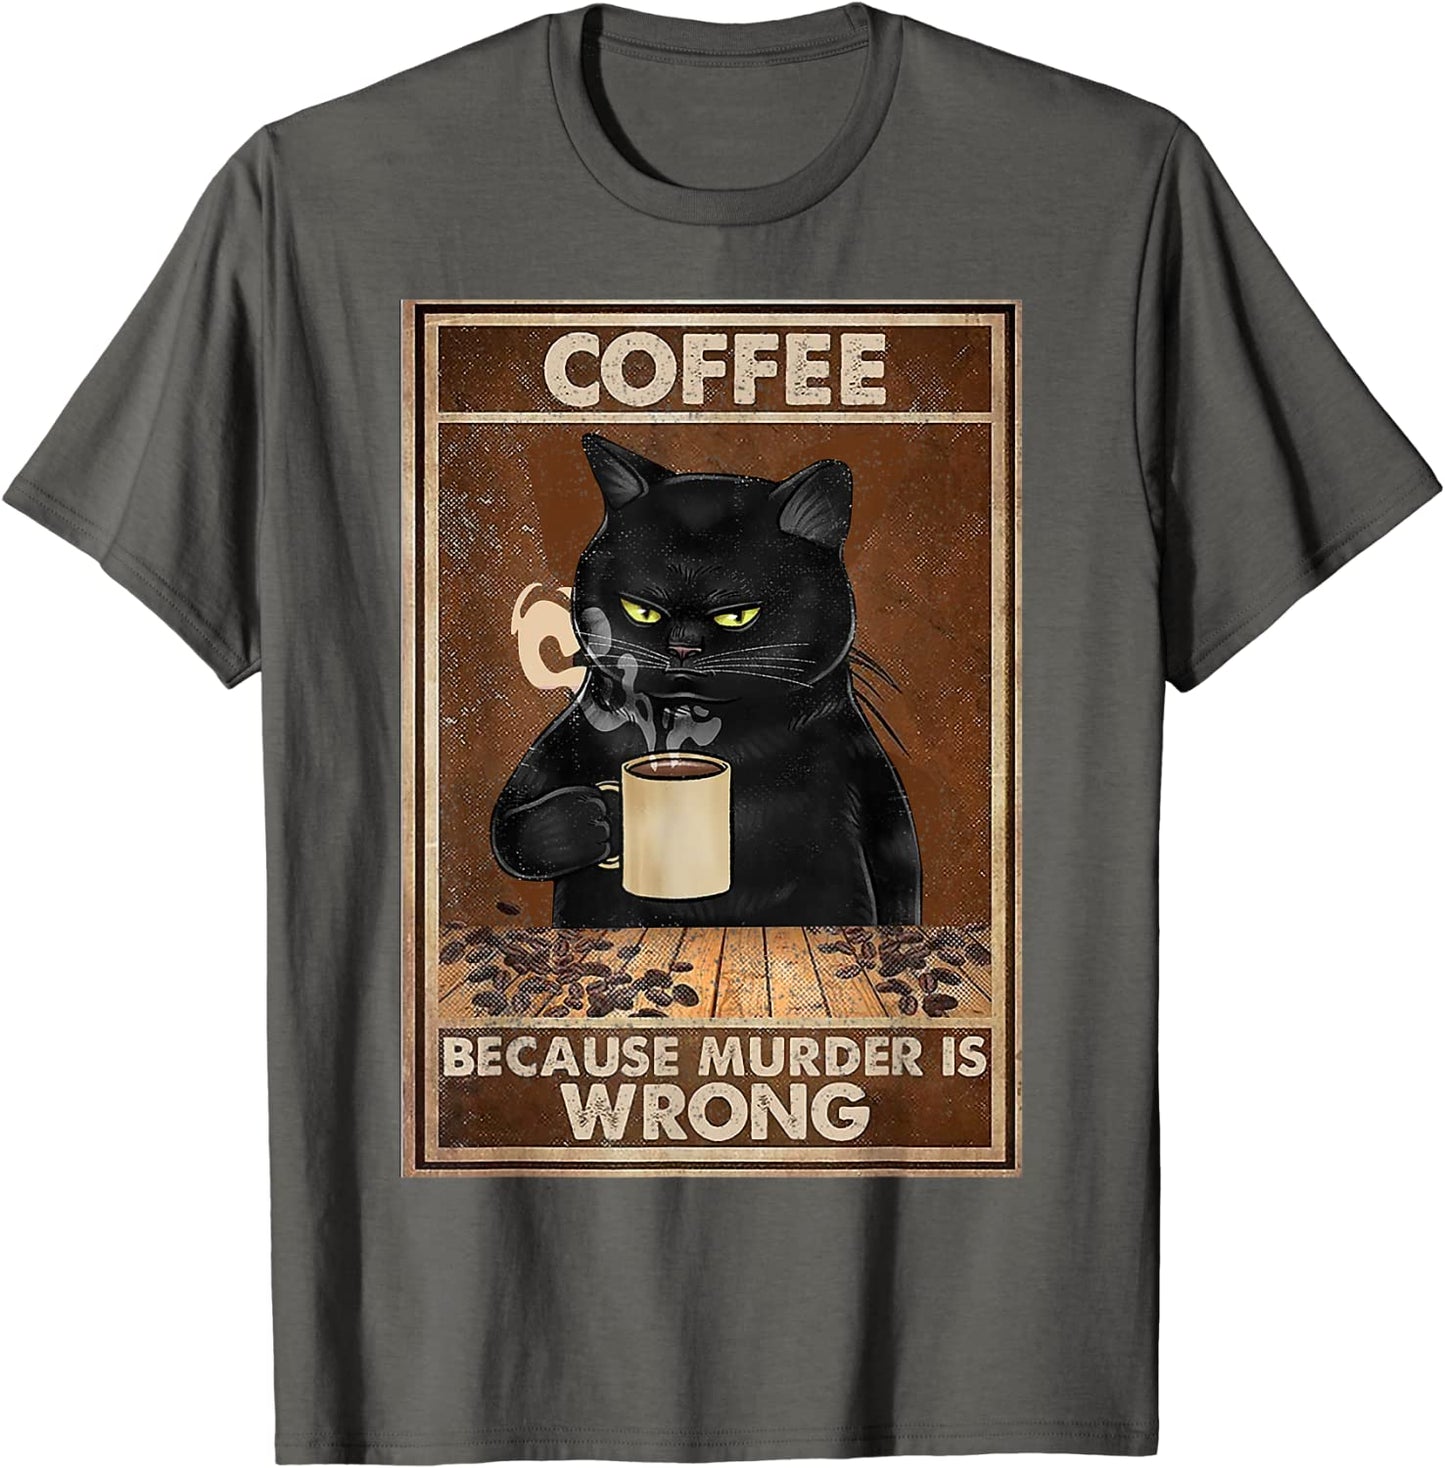 T-shirt with black cat and coffee graphic for cat enthusiasts